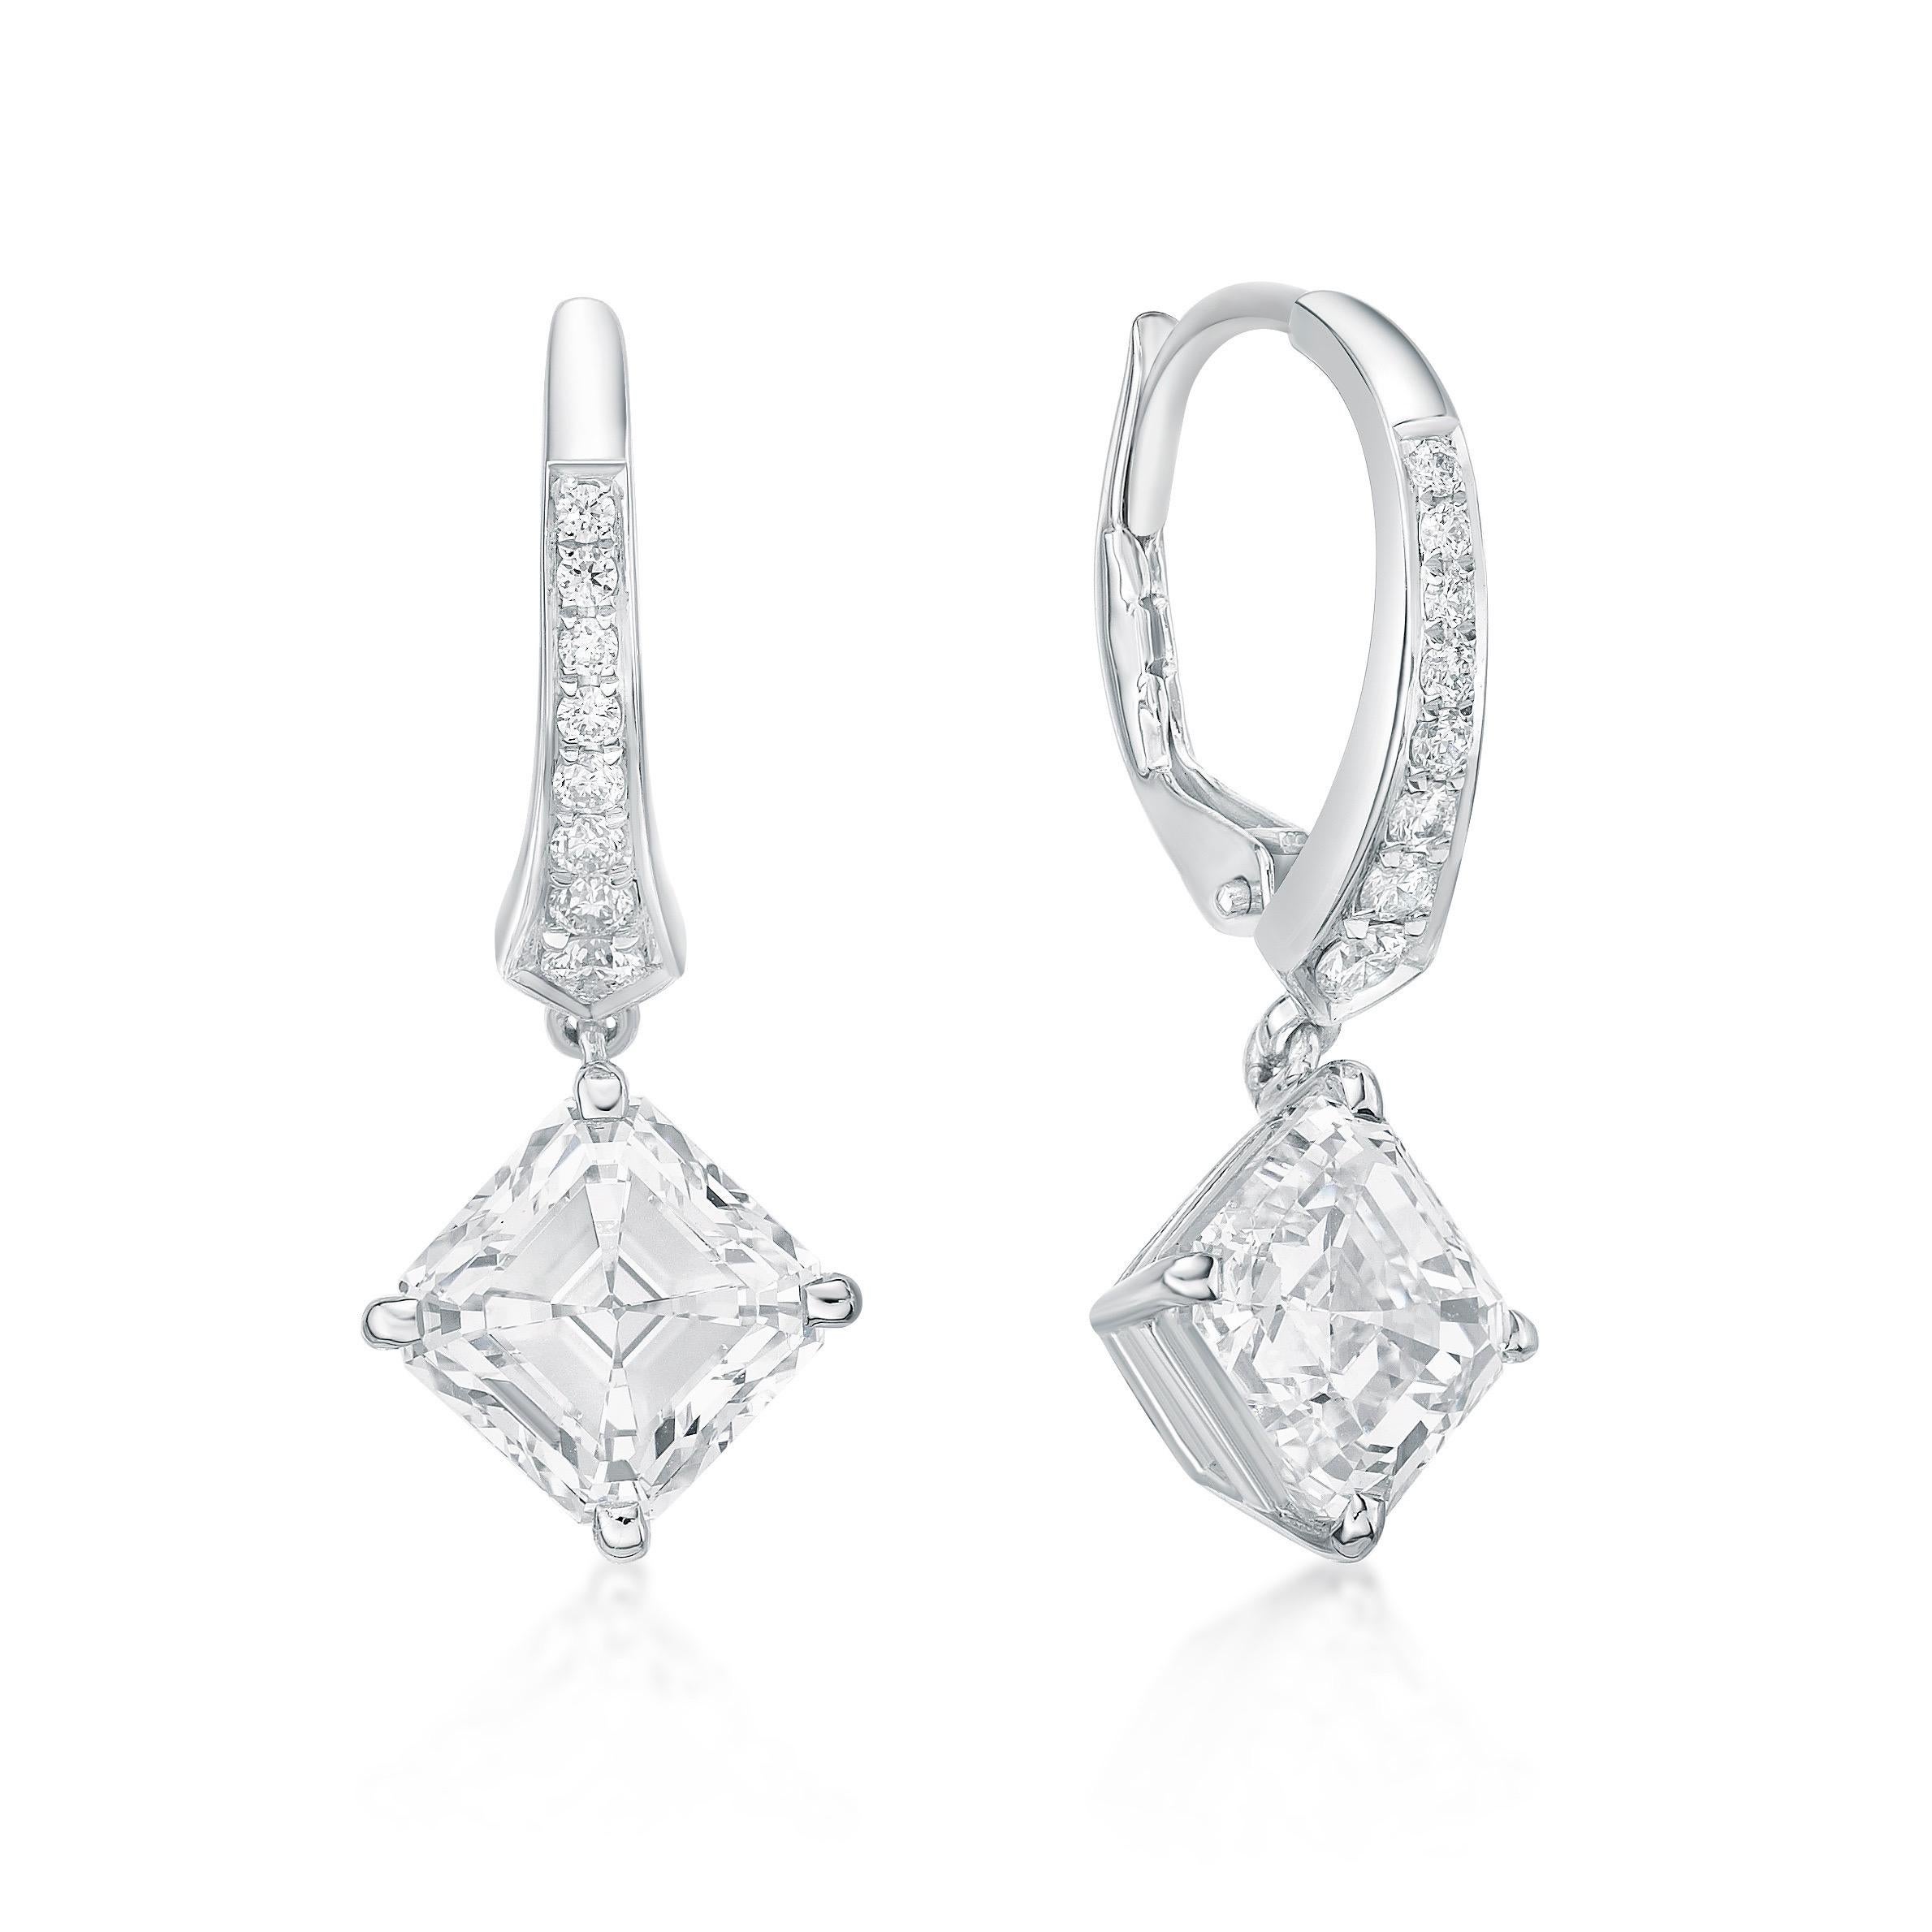 2 dia-rad 4.00
14 dia-rfc 0.12
2 dia-rme 0.06
g-vvs1, h-vs1
From The Vault at Emilio Jewelry Located on New York's iconic Fifth Avenue,
Showcasing a very special and rare Gia certified earring of Asscher Cuts G color vvs1, and H Vs1 perfect pair